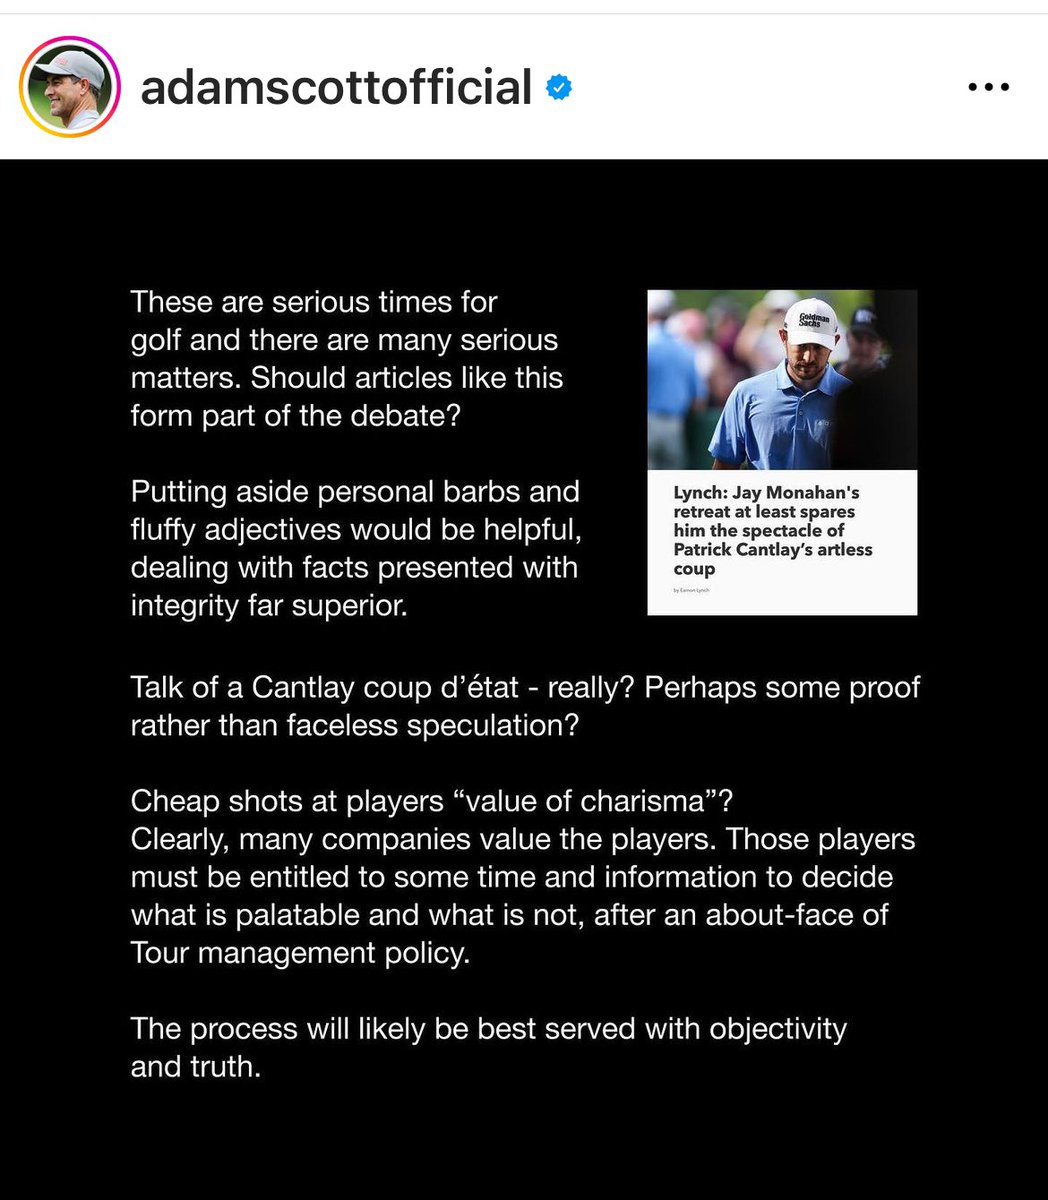 Adam Scott puts Eamon Leach back in his box ⚰️ 

Important & intelligent conversation rather than divisive nonsense is what’s required at this time.